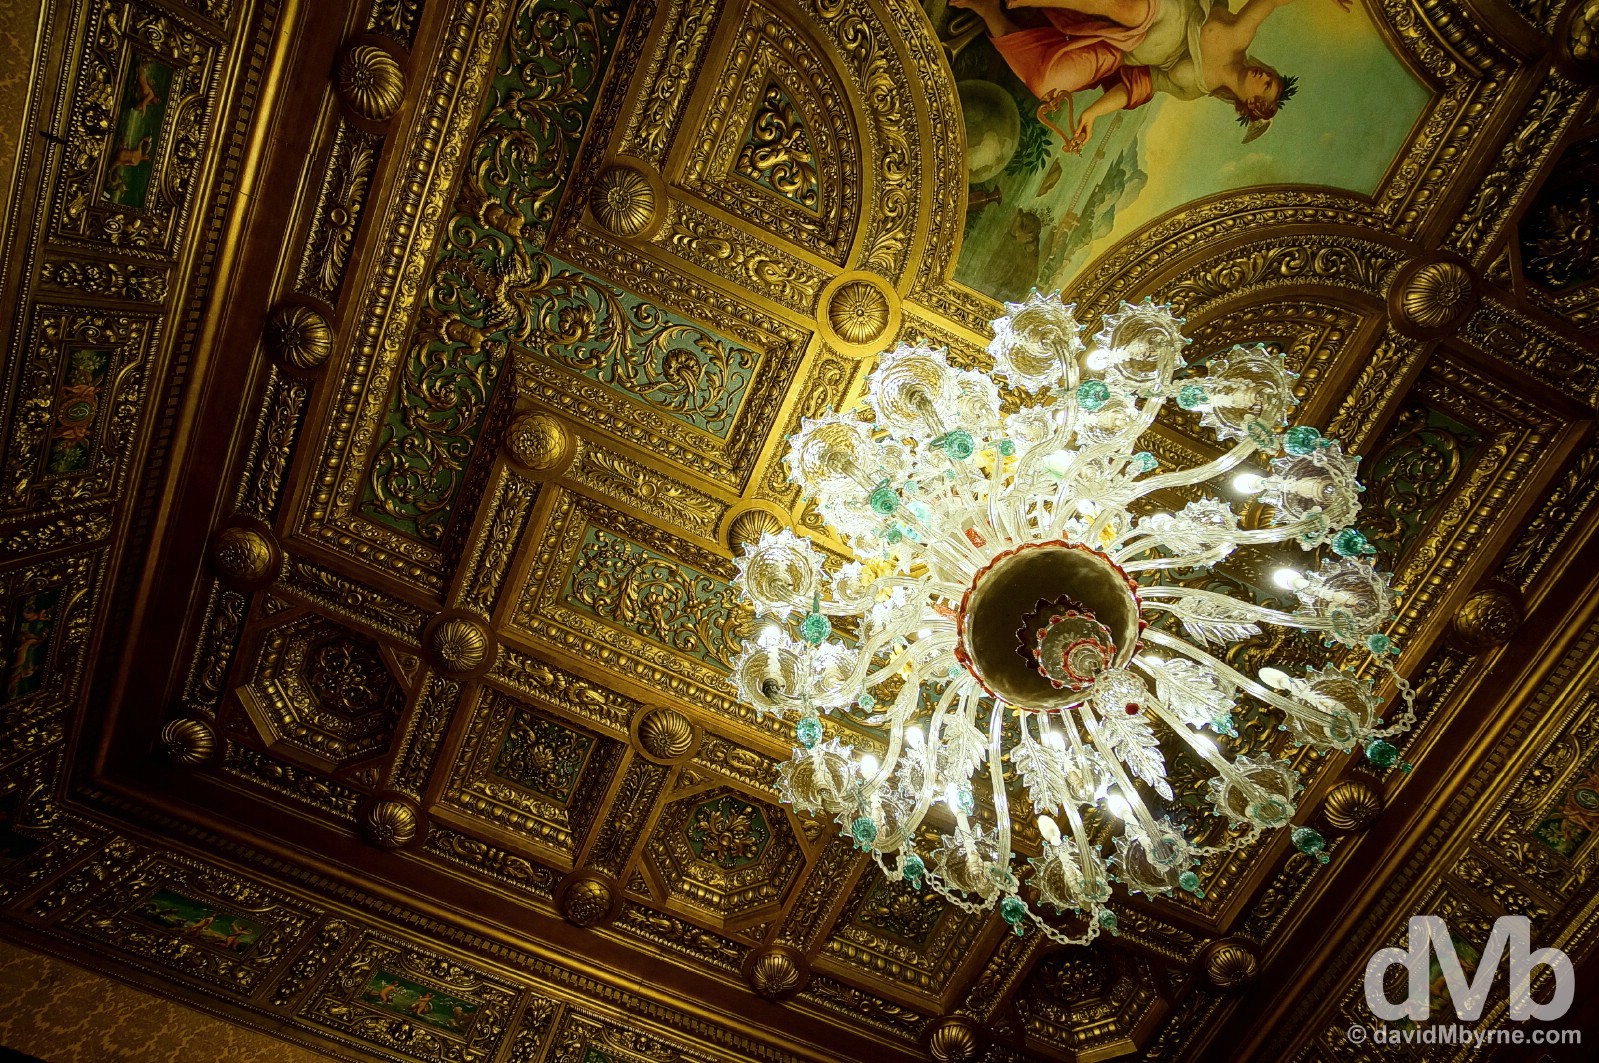 A section of ceiling in Peles Castle, Romania. April 2, 2015.